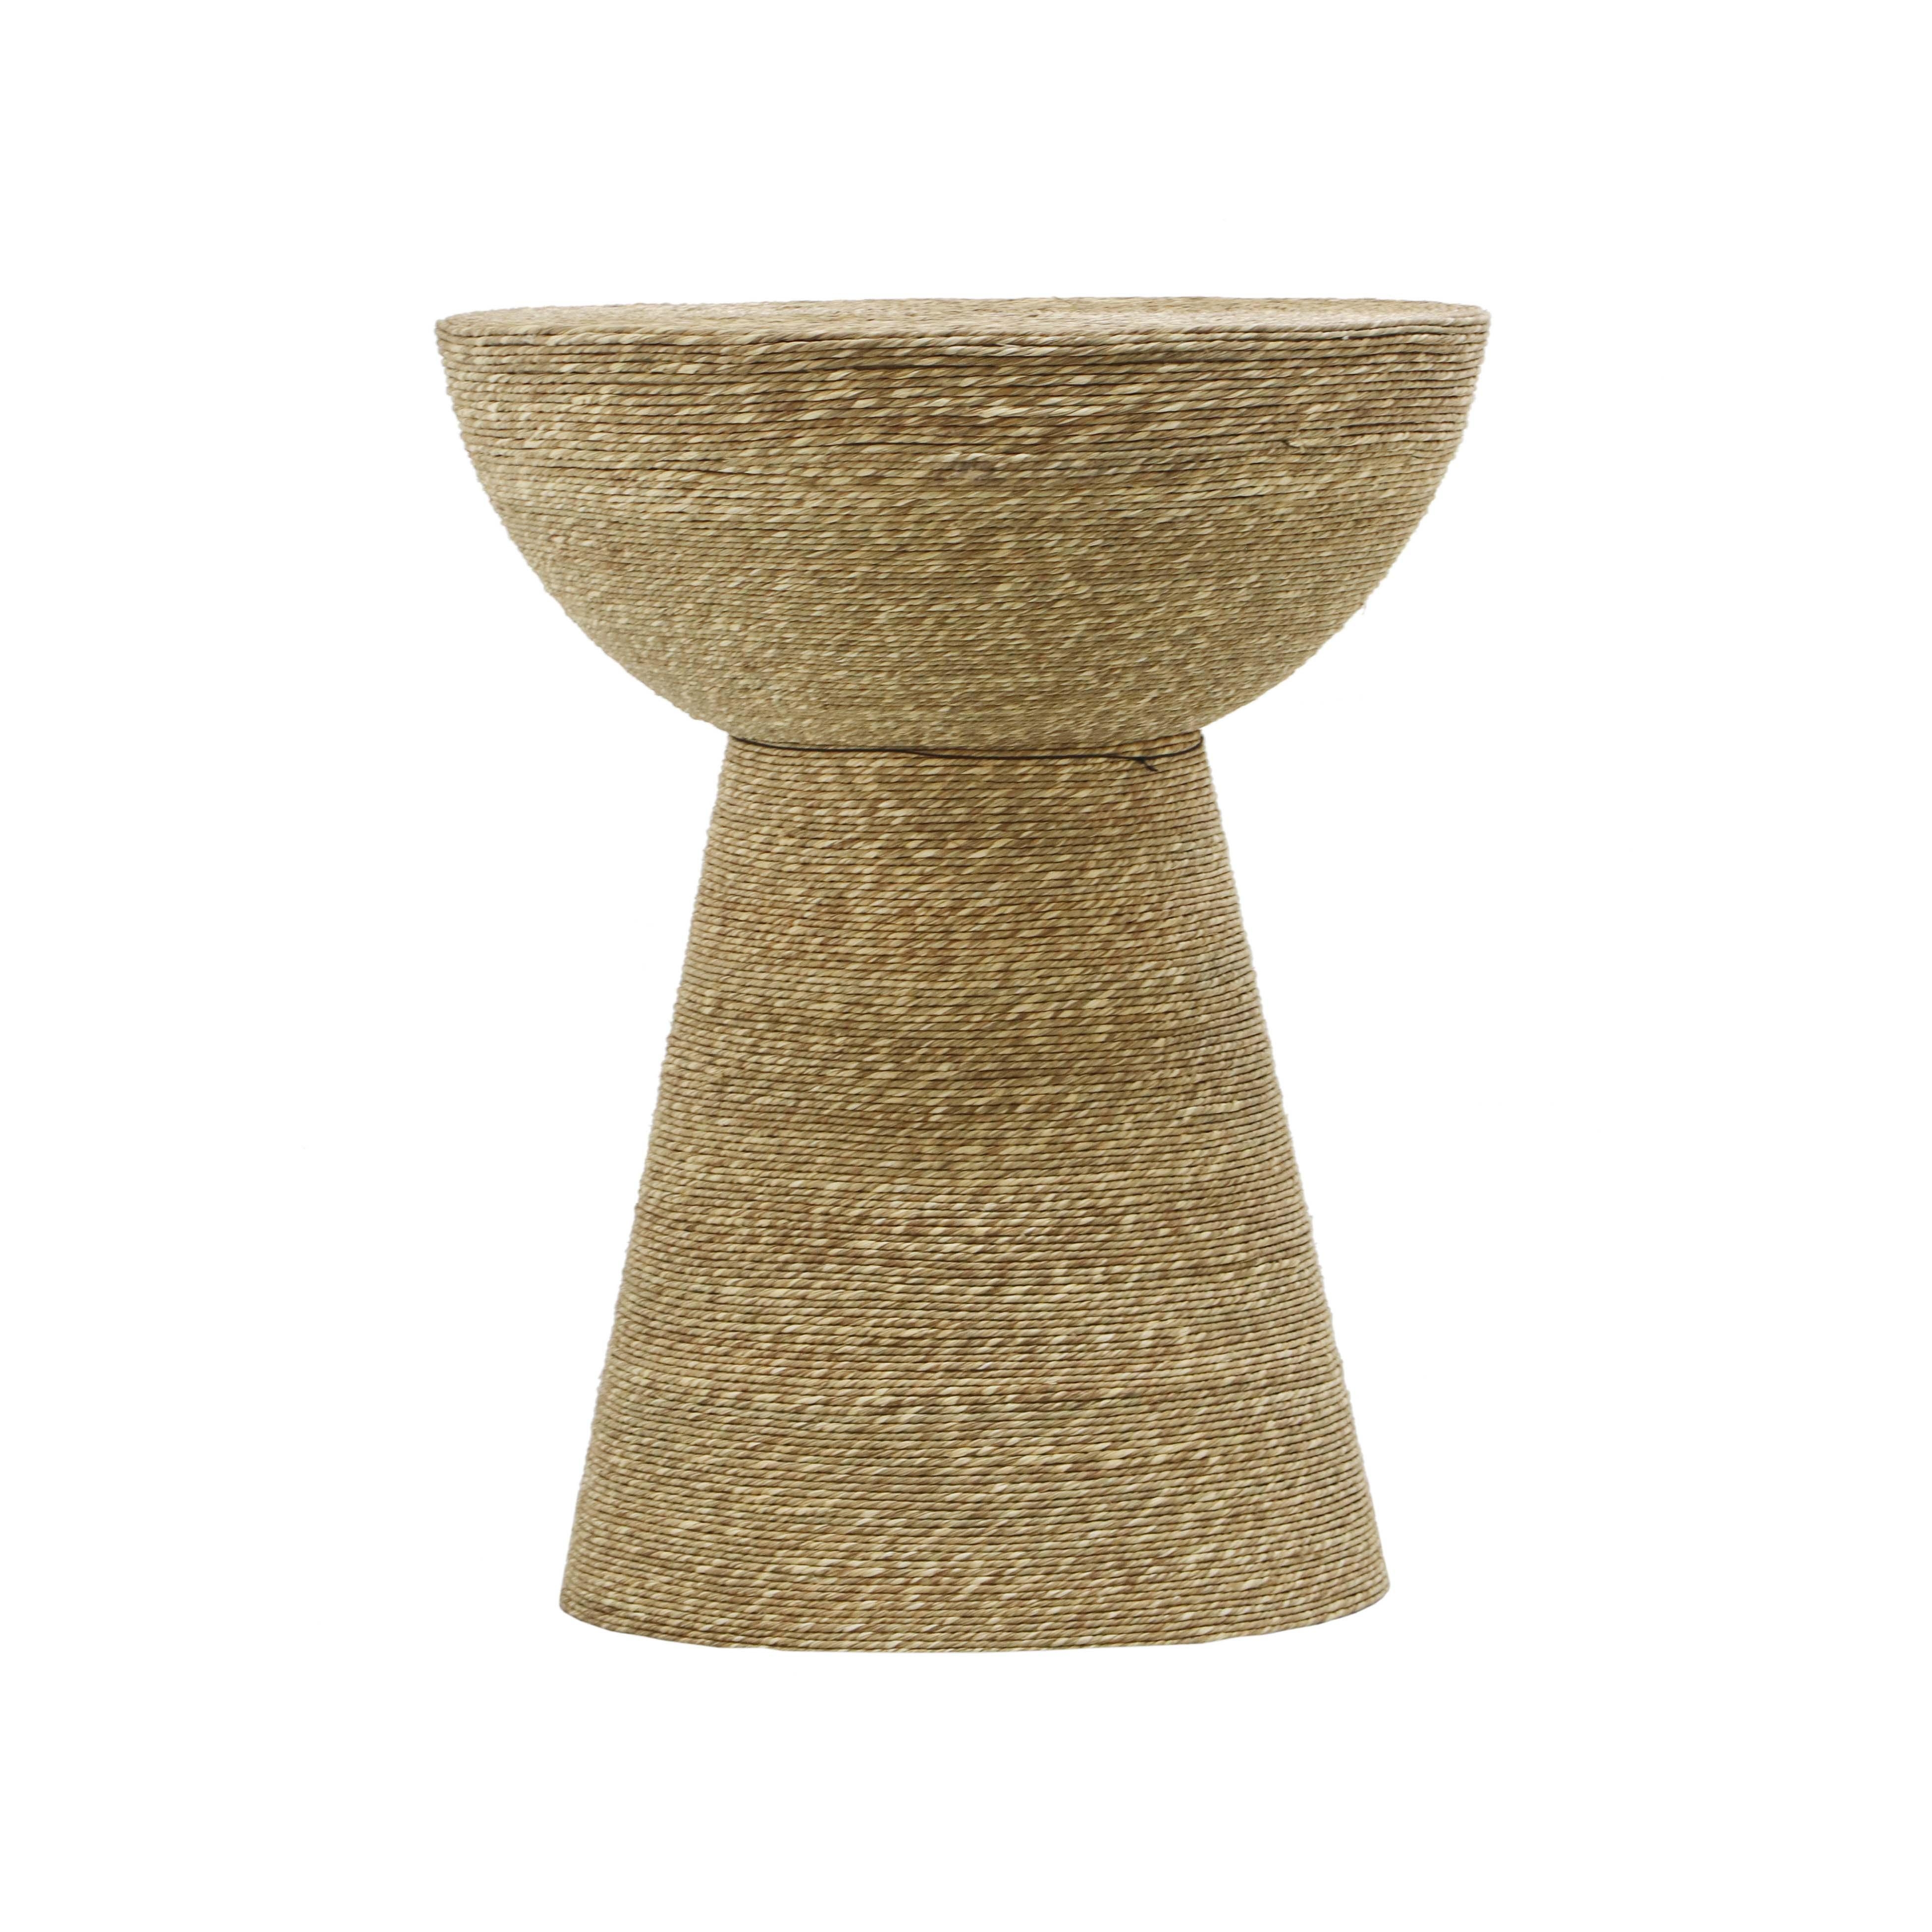 Wren Seagrass Side Table - Image 1